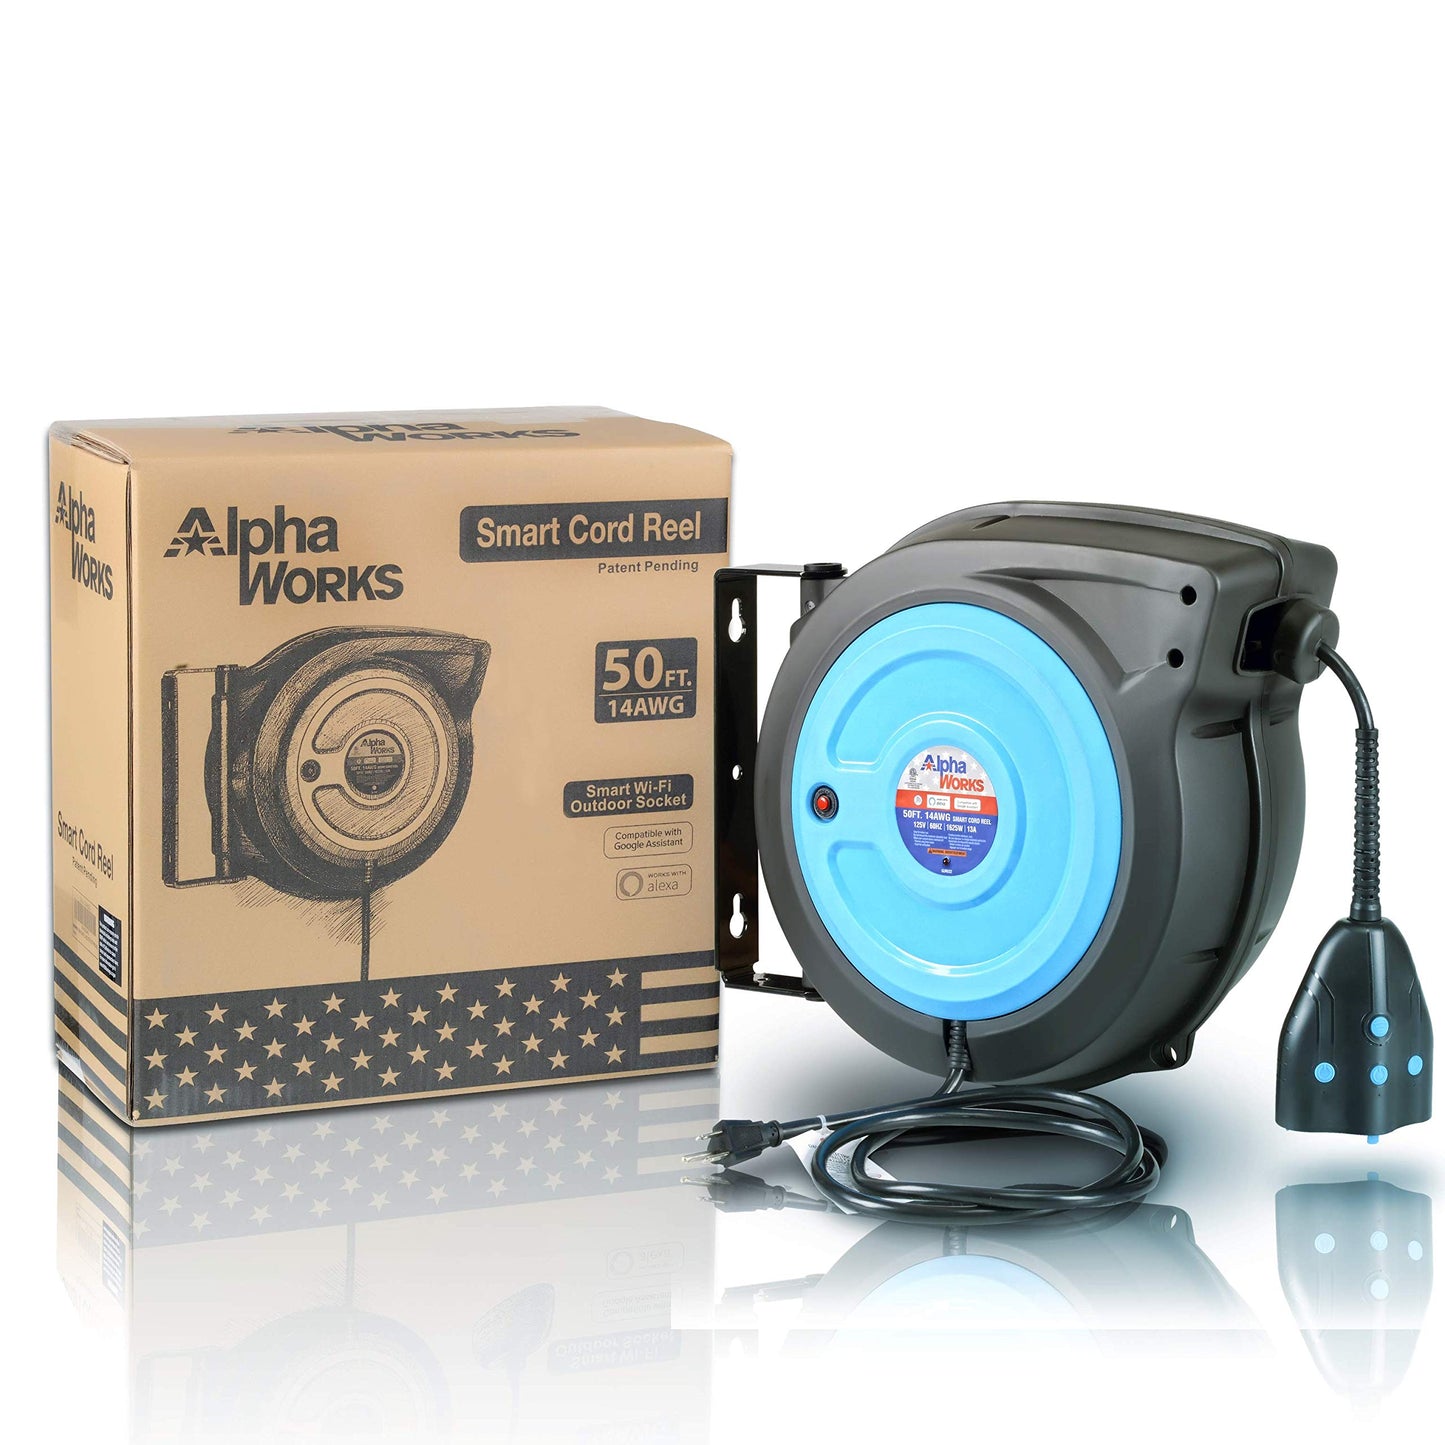 AlphaWorks Cord Reel Extension for Alexa Smart Plug 50' Feet Waterproof Wireless Remote Control Timer & Advanced Slow Retraction Technology